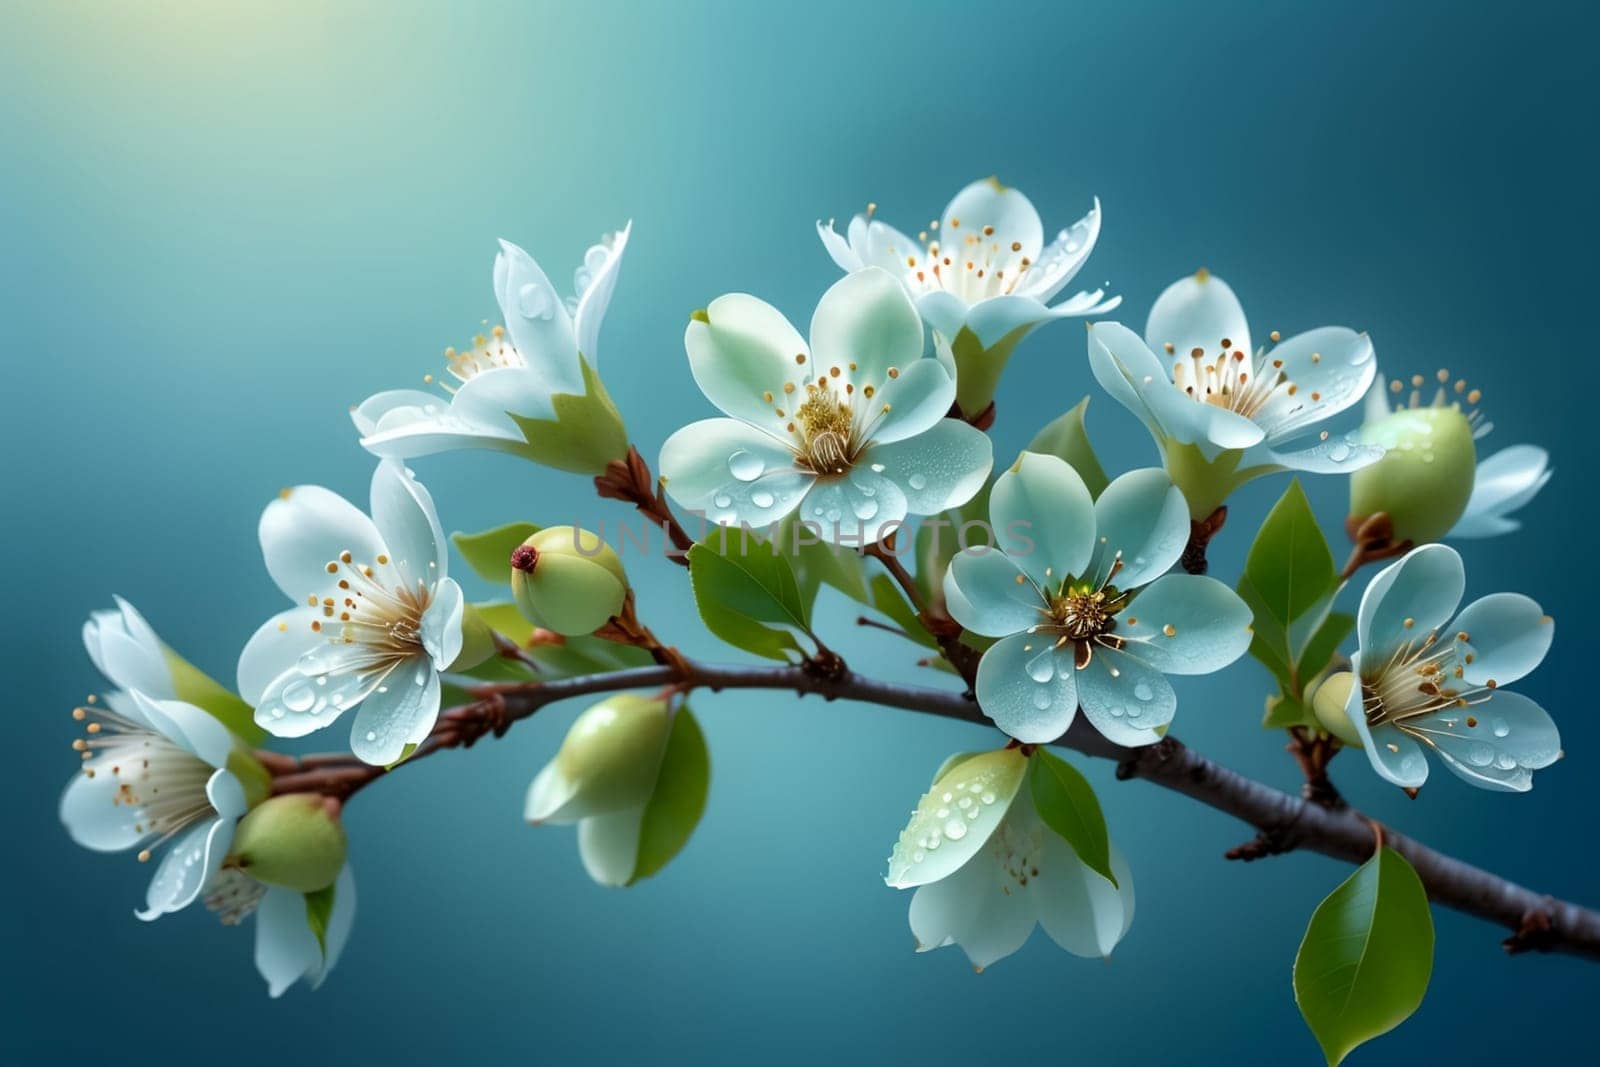 blooming white pear flowers on a blue background.